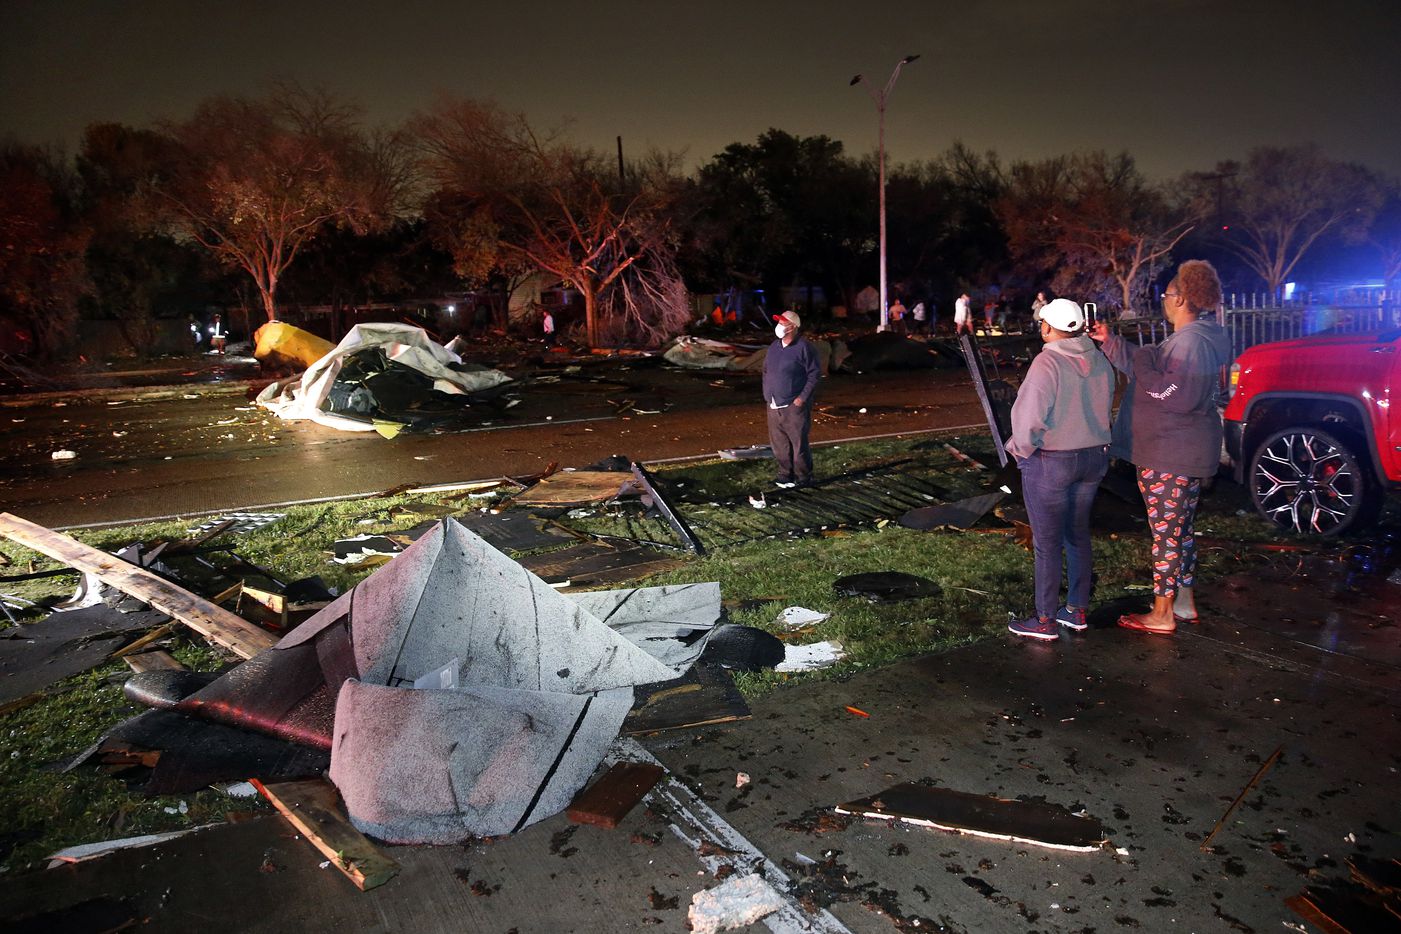 People inspect roofs of The Mirage Apartments that tore off and landed on Pioneer Parkway in Arlington following a tornado-warned storm, Tuesday night, November 24, 2020. (Tom Fox/The Dallas Morning News)